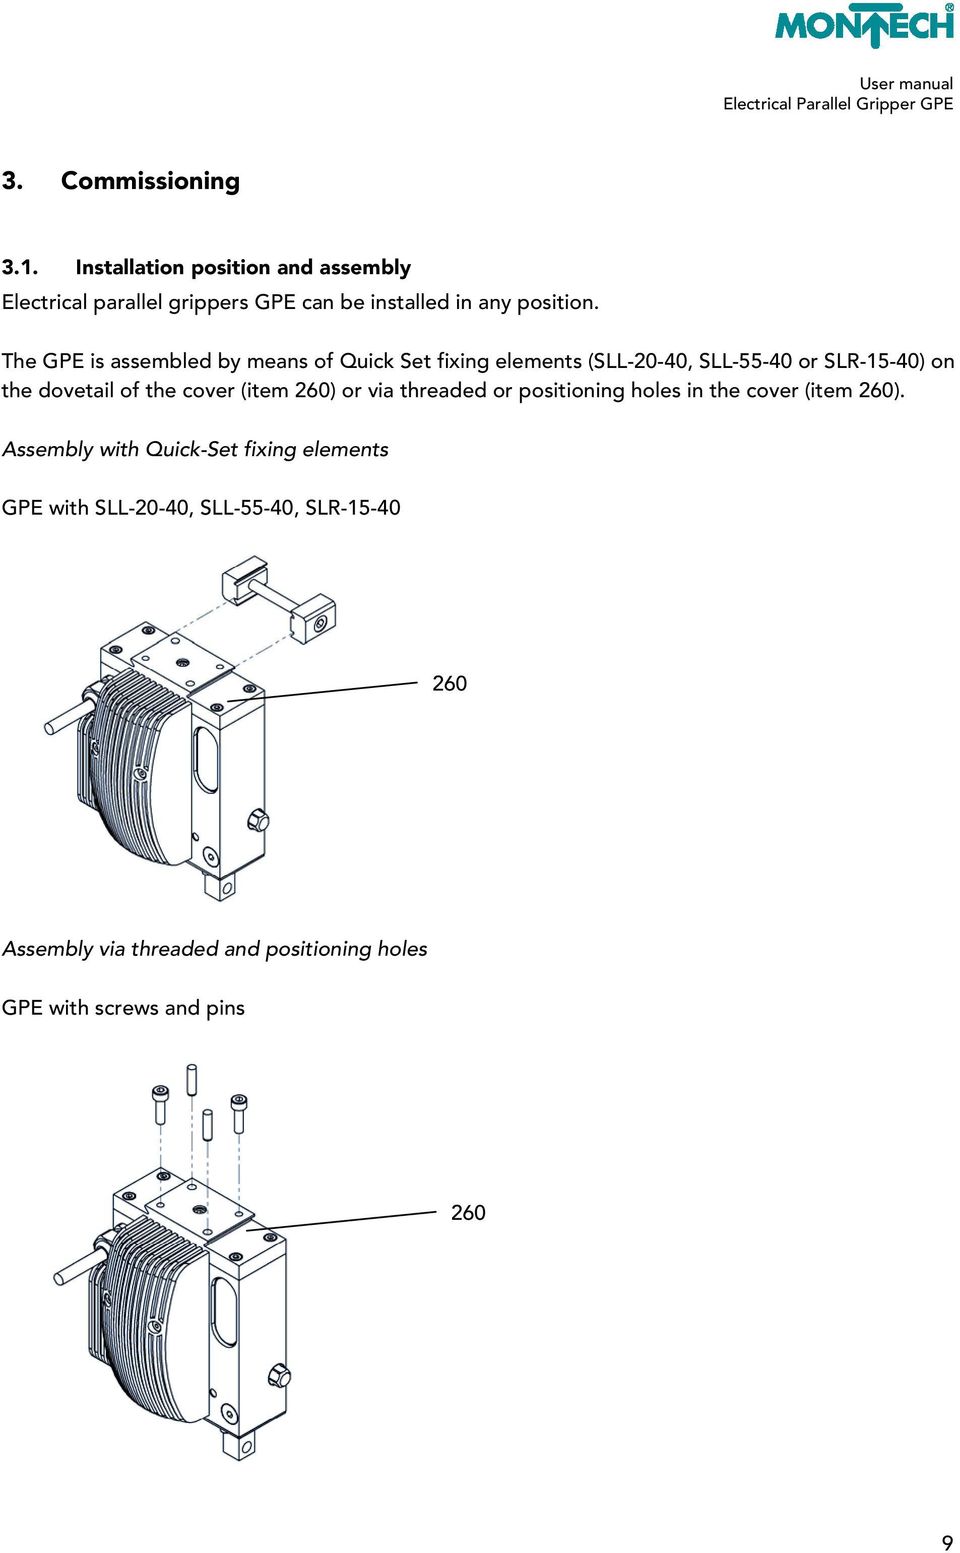 The GPE is assembled by means of Quick Set fixing elements (SLL-20-40, SLL-55-40 or SLR-15-40) on the dovetail of the